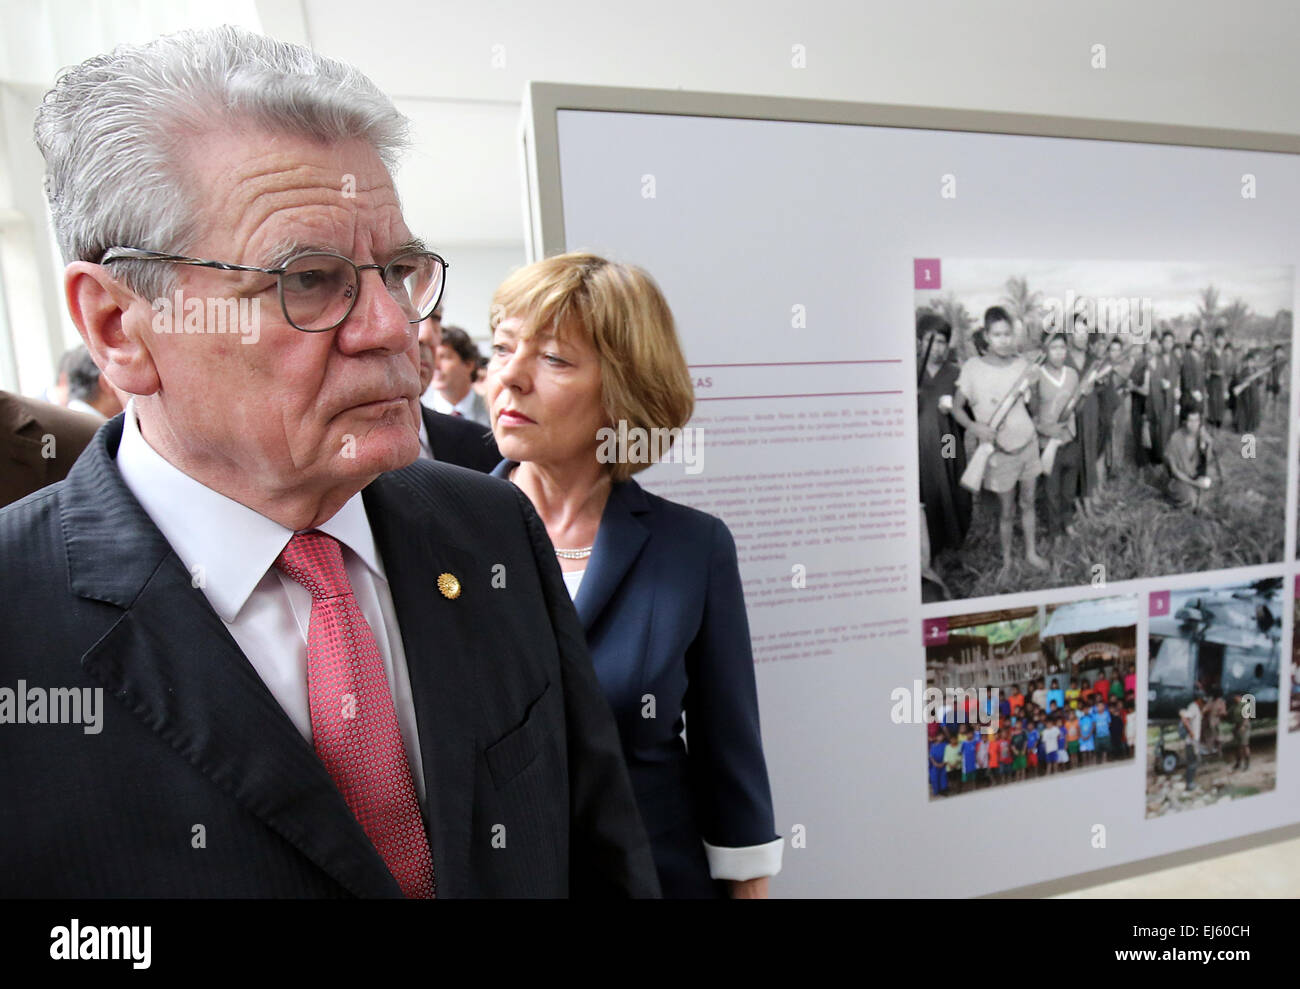 Lima, Peru. 21st Mar, 2015. German President Joachim Gauck and his life partner, Daniela Schadt, visit an exhibition on the time of the armed, internal conflict in Peru in the 'Lugar de la Memoria' museum in Lima, Peru, 21 March 2015. The German president is on a multi-day visit to South America. Photo: WOLFGANG KUMM/dpa/Alamy Live News Stock Photo